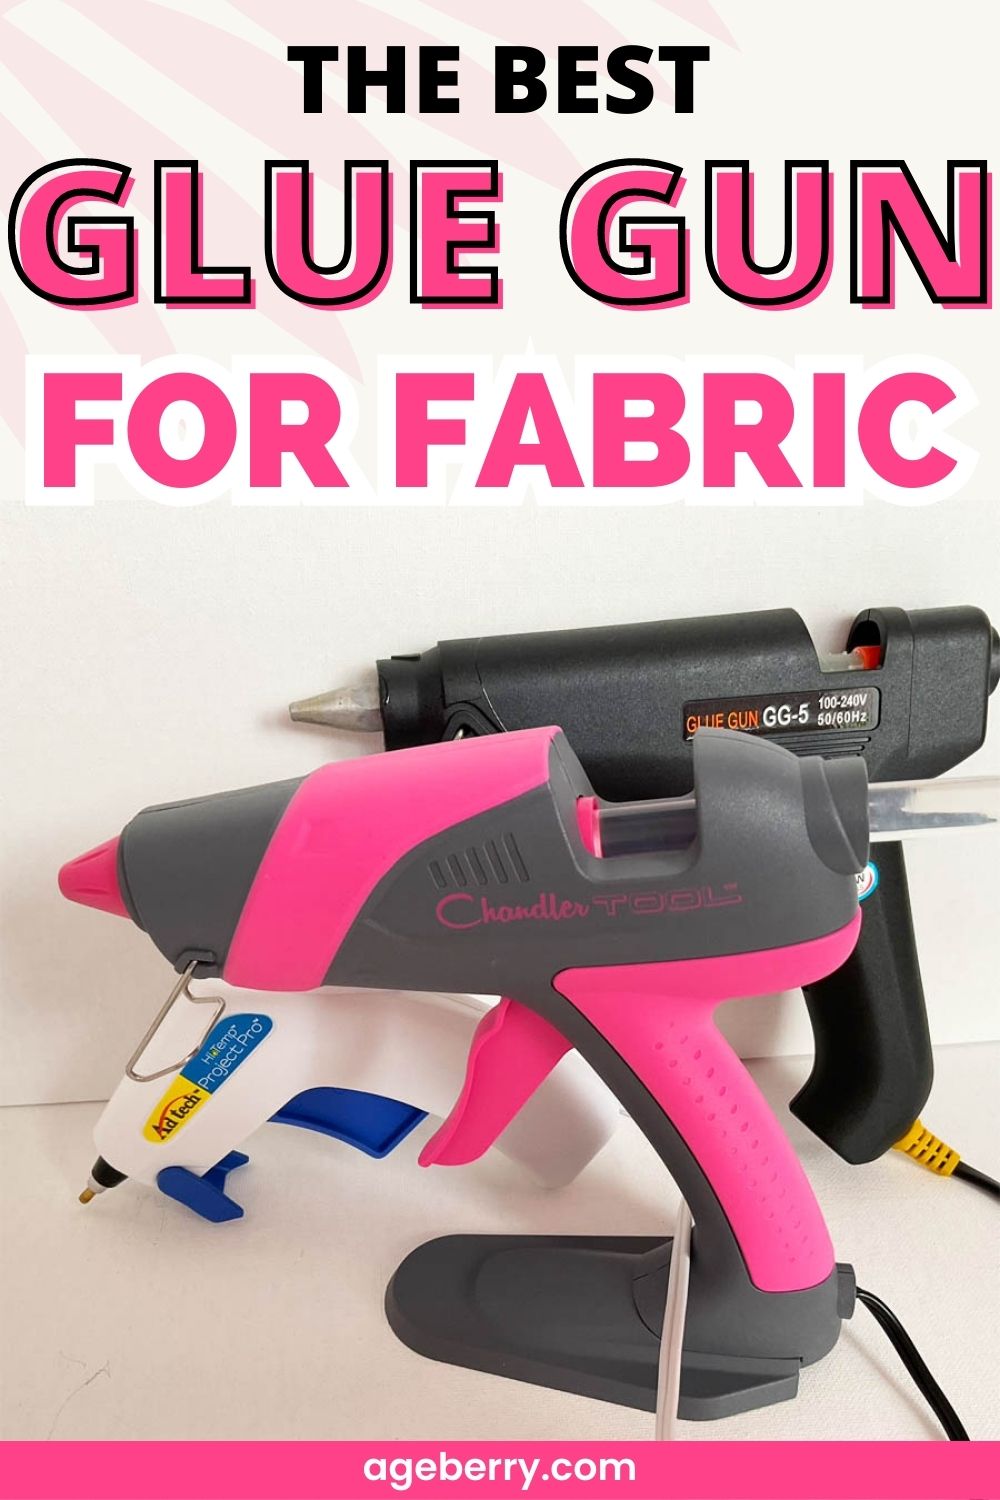 The Best Glue Gun For Fabric: Top Picks And Buying Guide